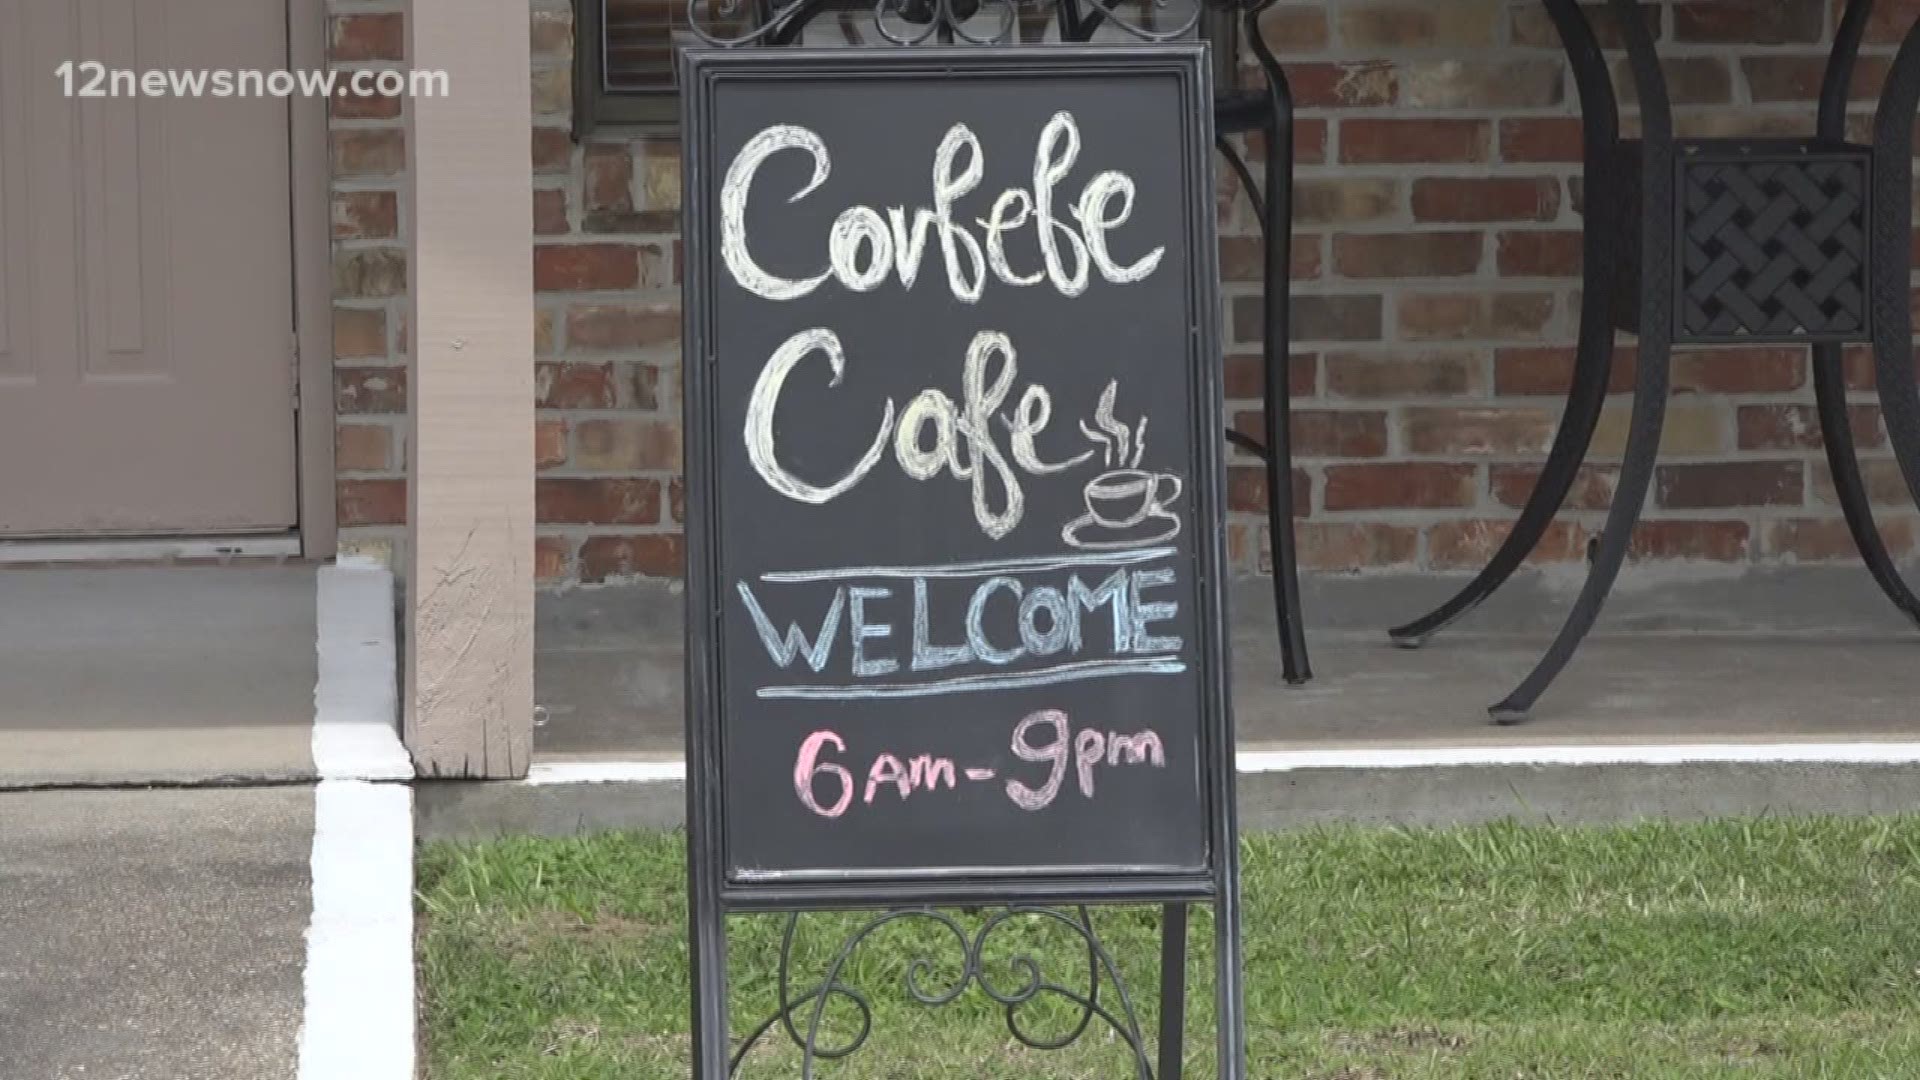 Port Neches residents admit the name is unique, but say they will support the new business.